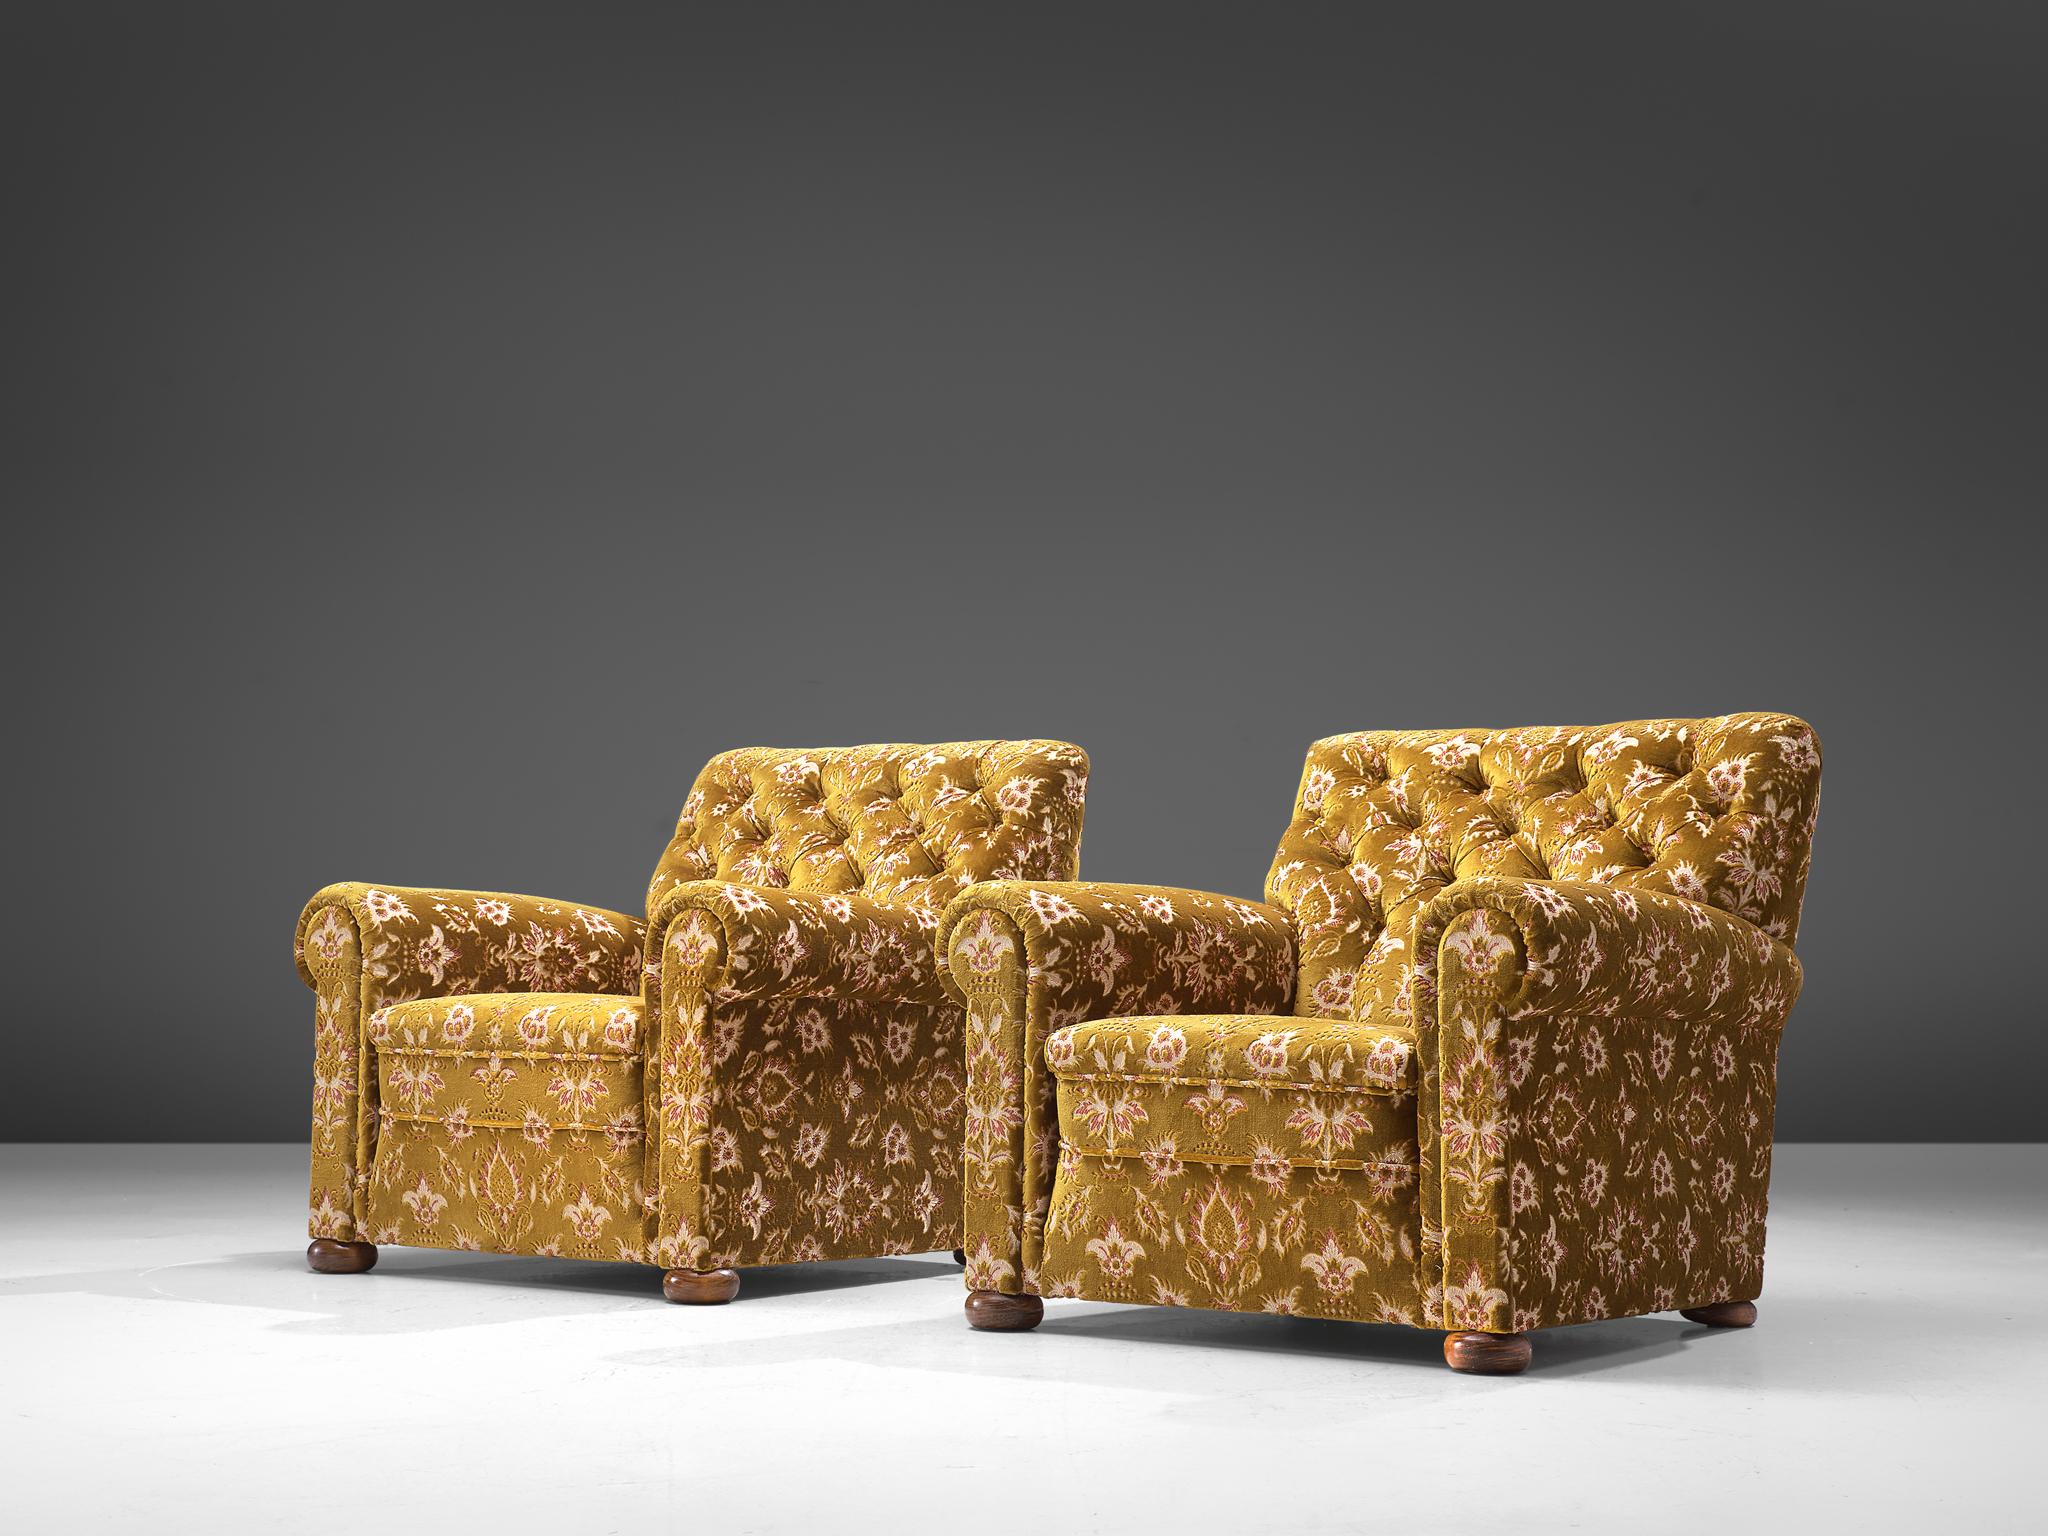 Lounge chairs, fabric and oak, Italy, 1940s.

Italian Art Deco set of armchairs with tufted backrests. These chairs have a certain grace and luxury thanks to the rectangular shaped backrest with tufting. The chairs feature a very deep seat and